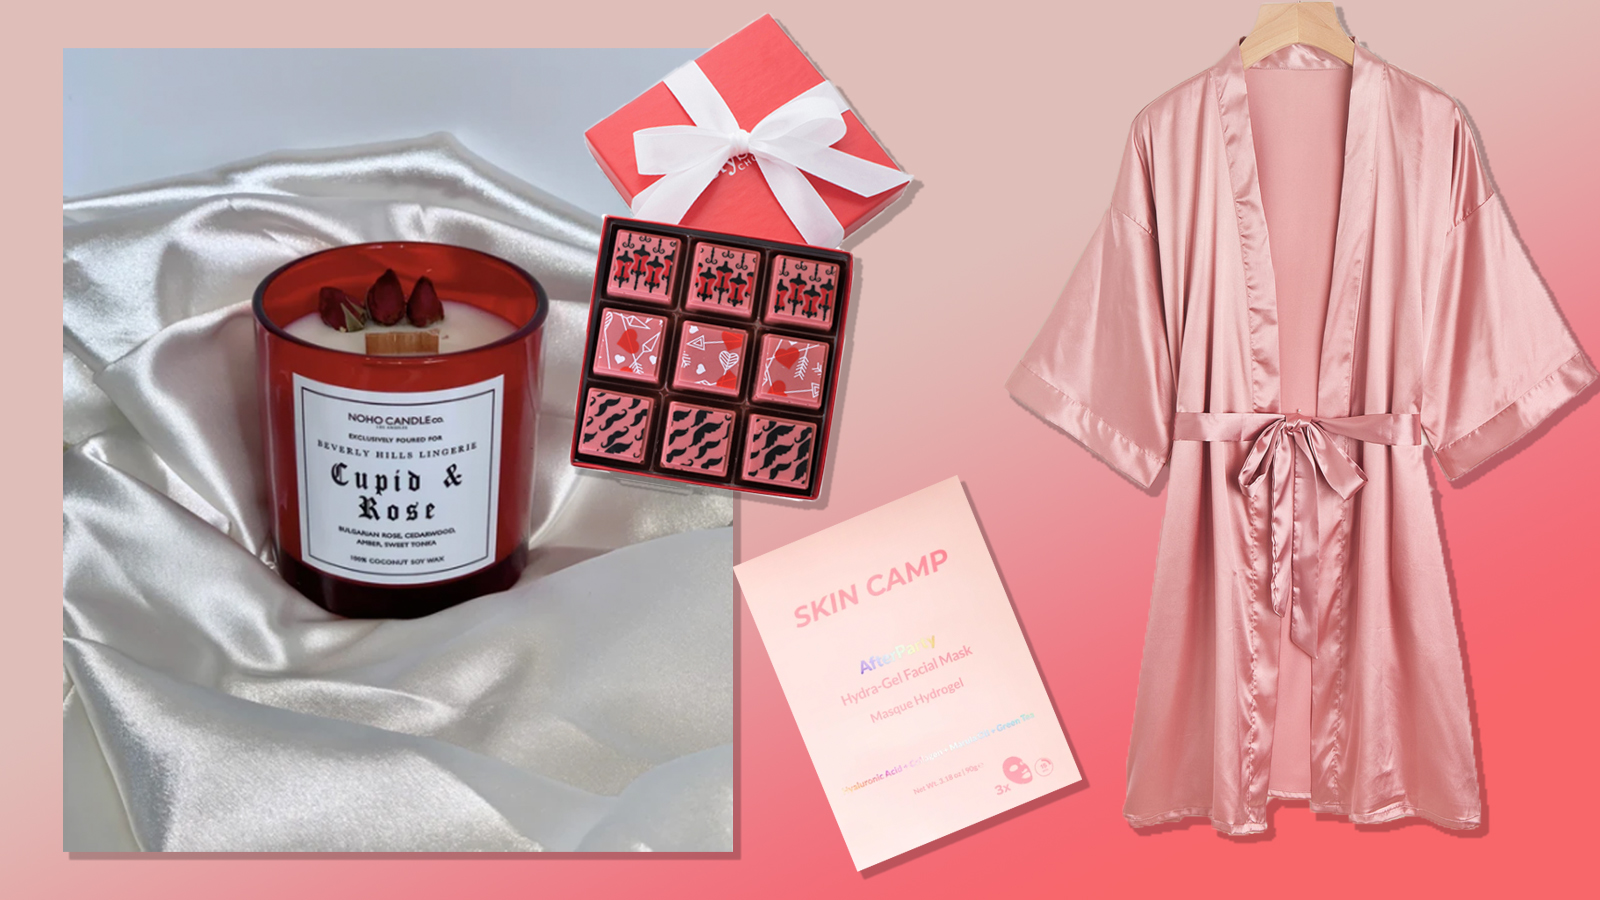 A highbrow, boutique chocolate box & 5 other things I obsessed over in
January